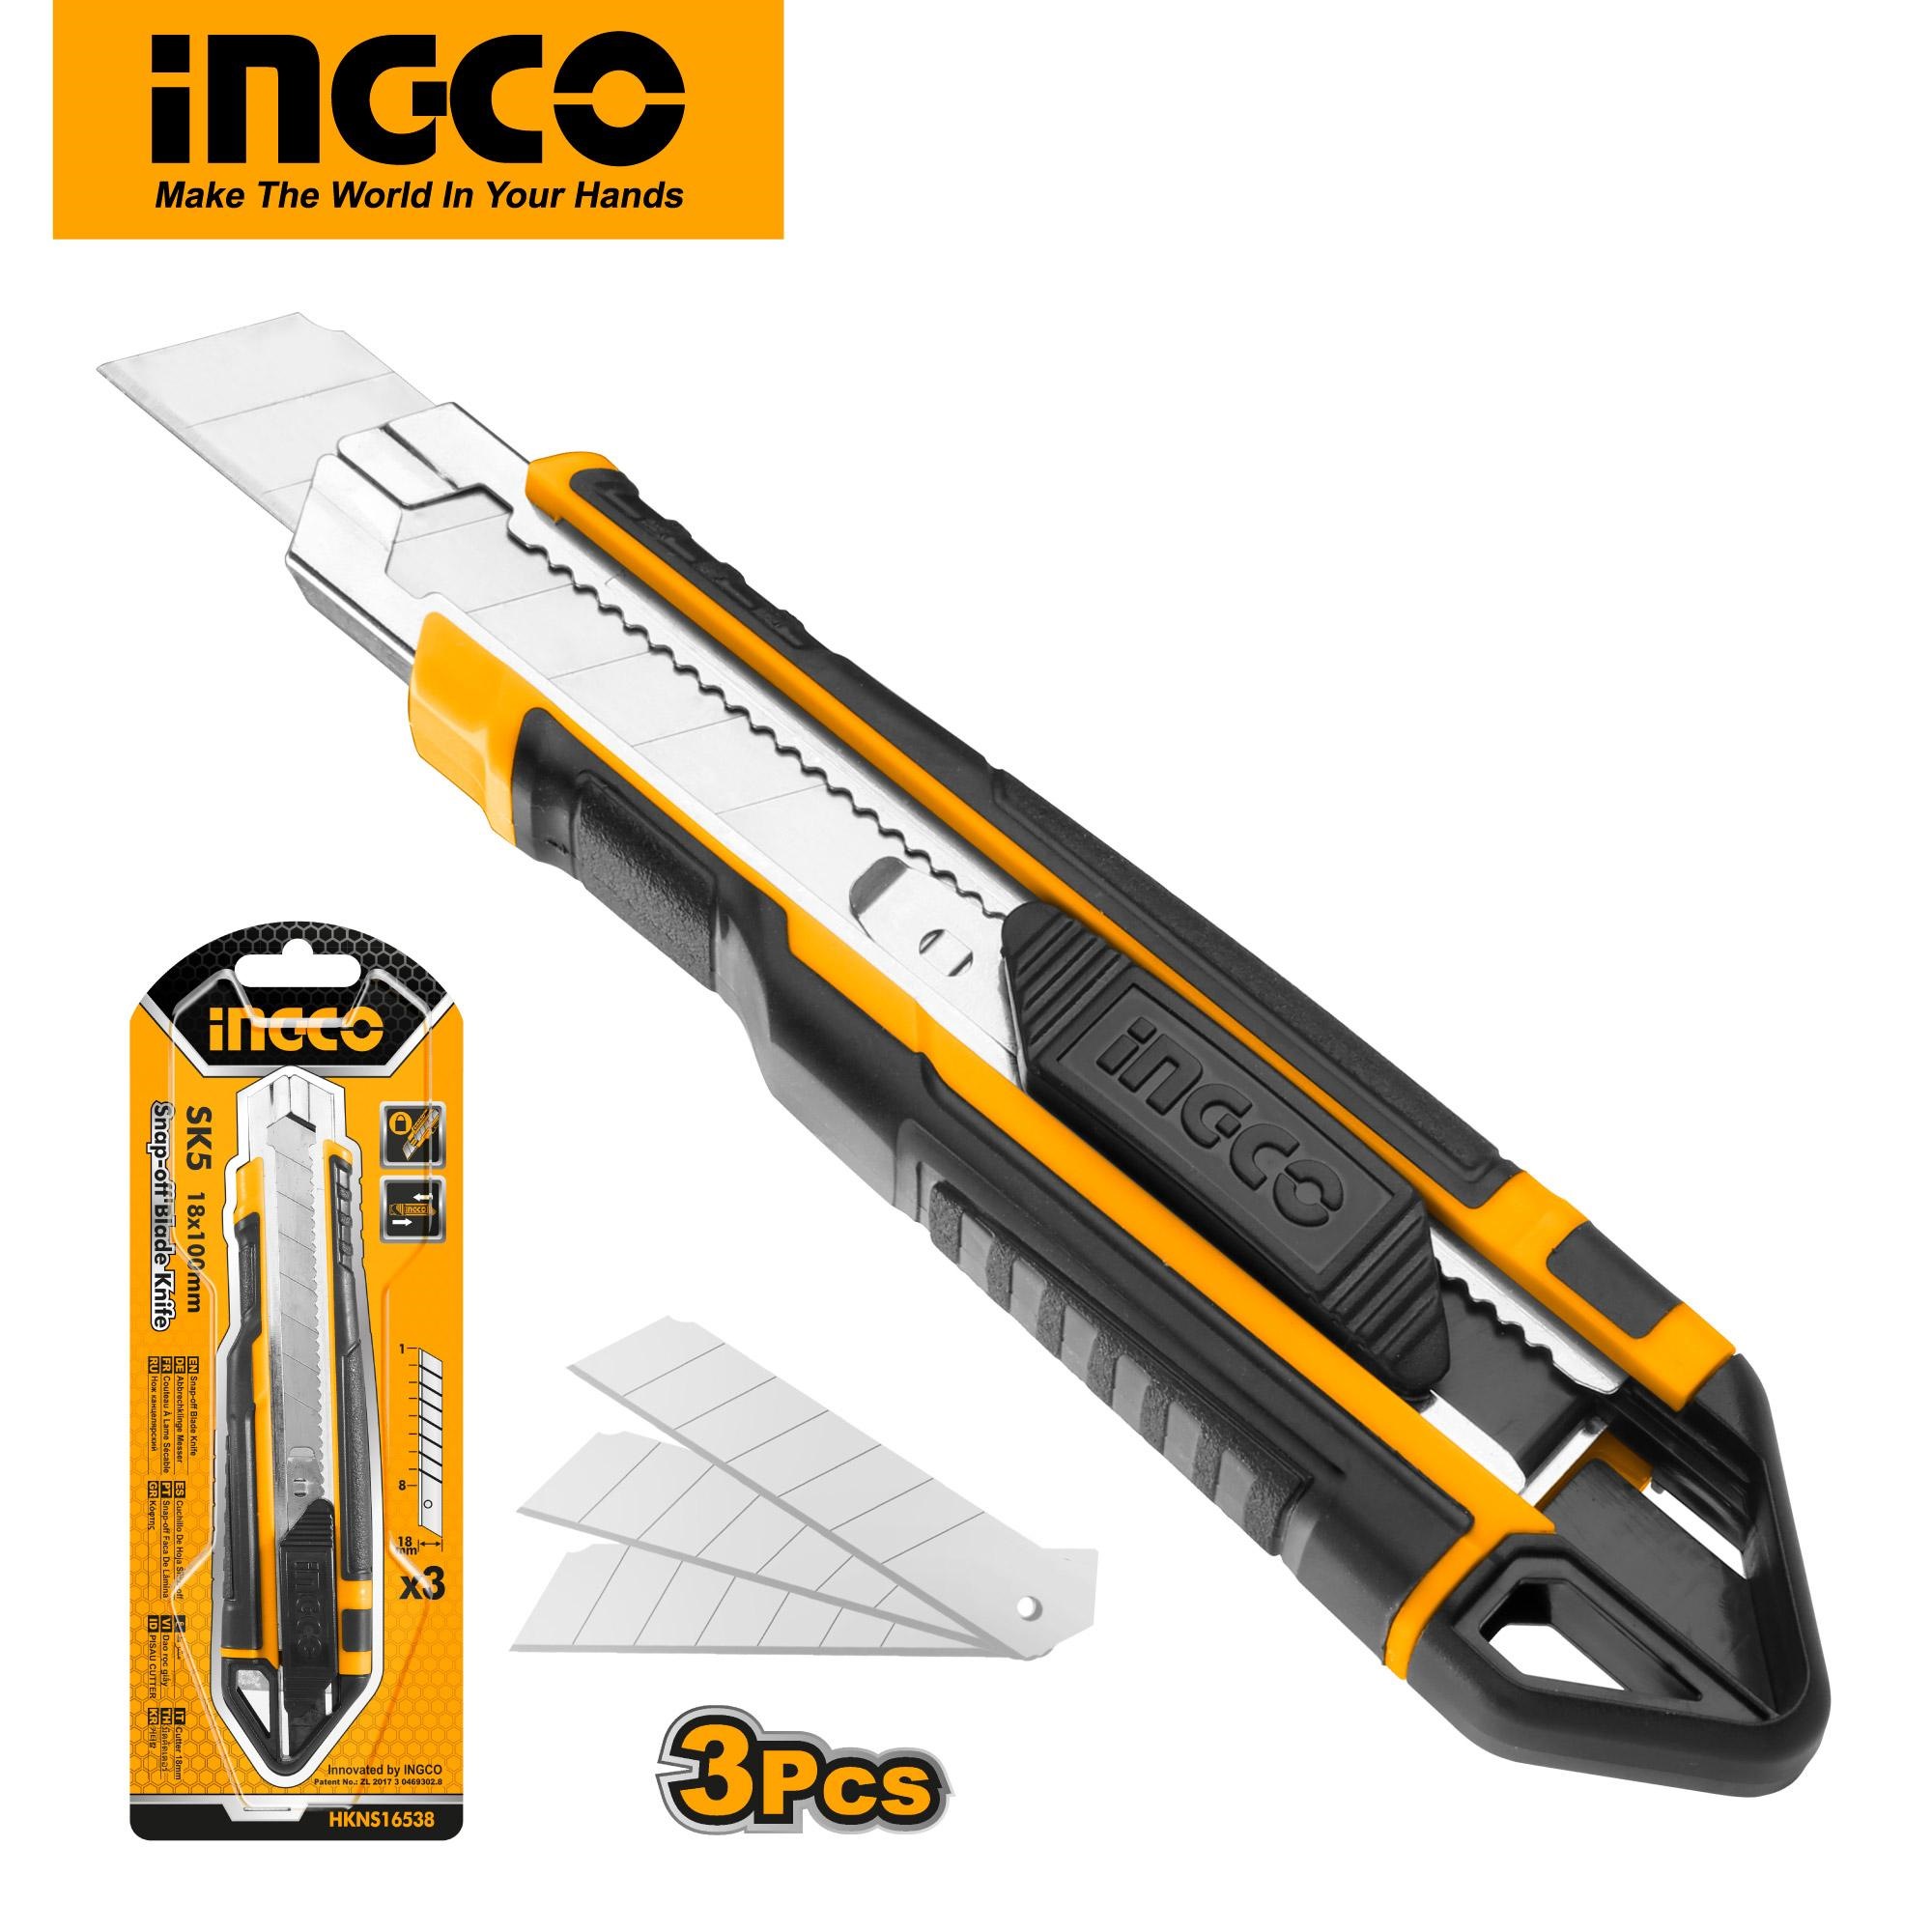 INGCO SNAP-OFF BLADE KNIFE 18MM W/3 SK5 BLADES HKNS16538 | Office 